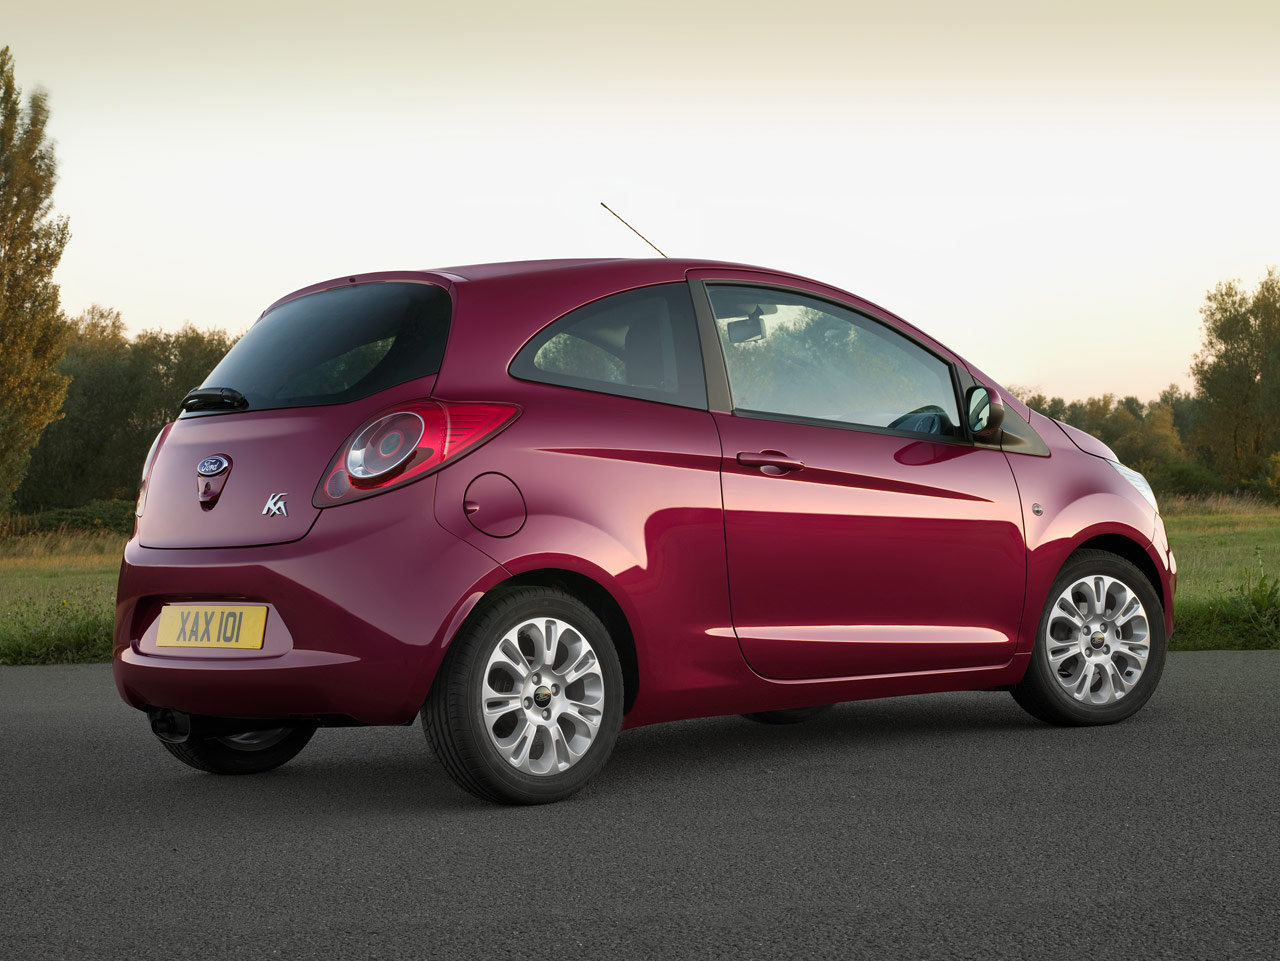 Ford Ka 09 Review Amazing Pictures And Images Look At The Car